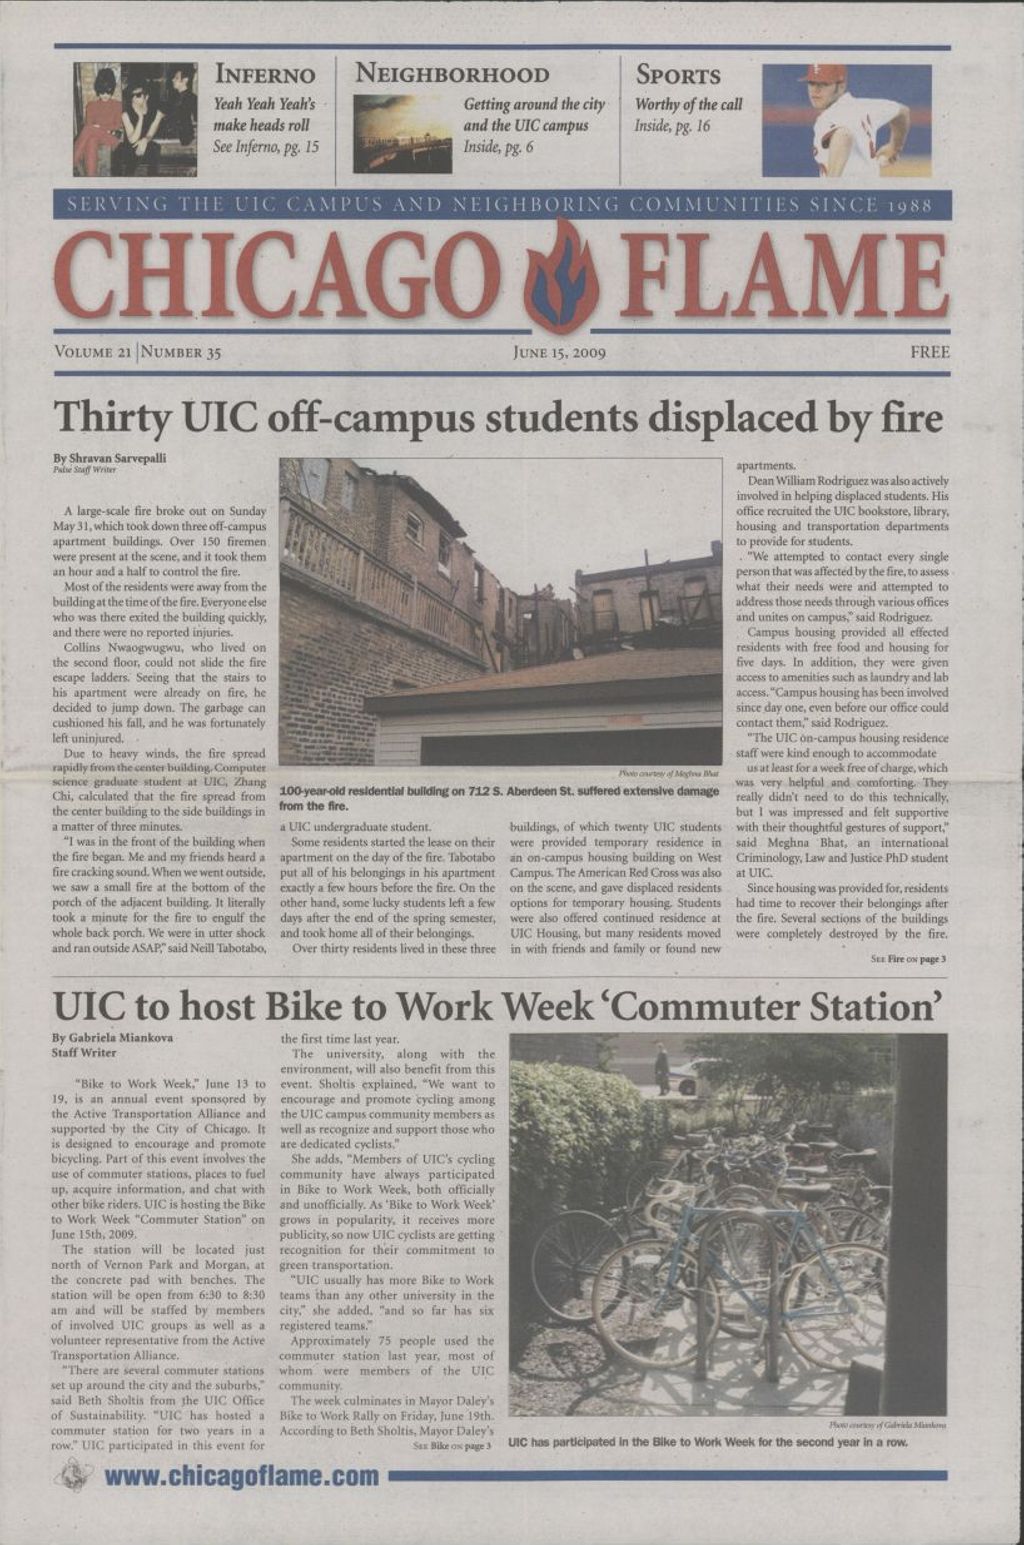 Miniature of Chicago Flame (June 15, 2009)